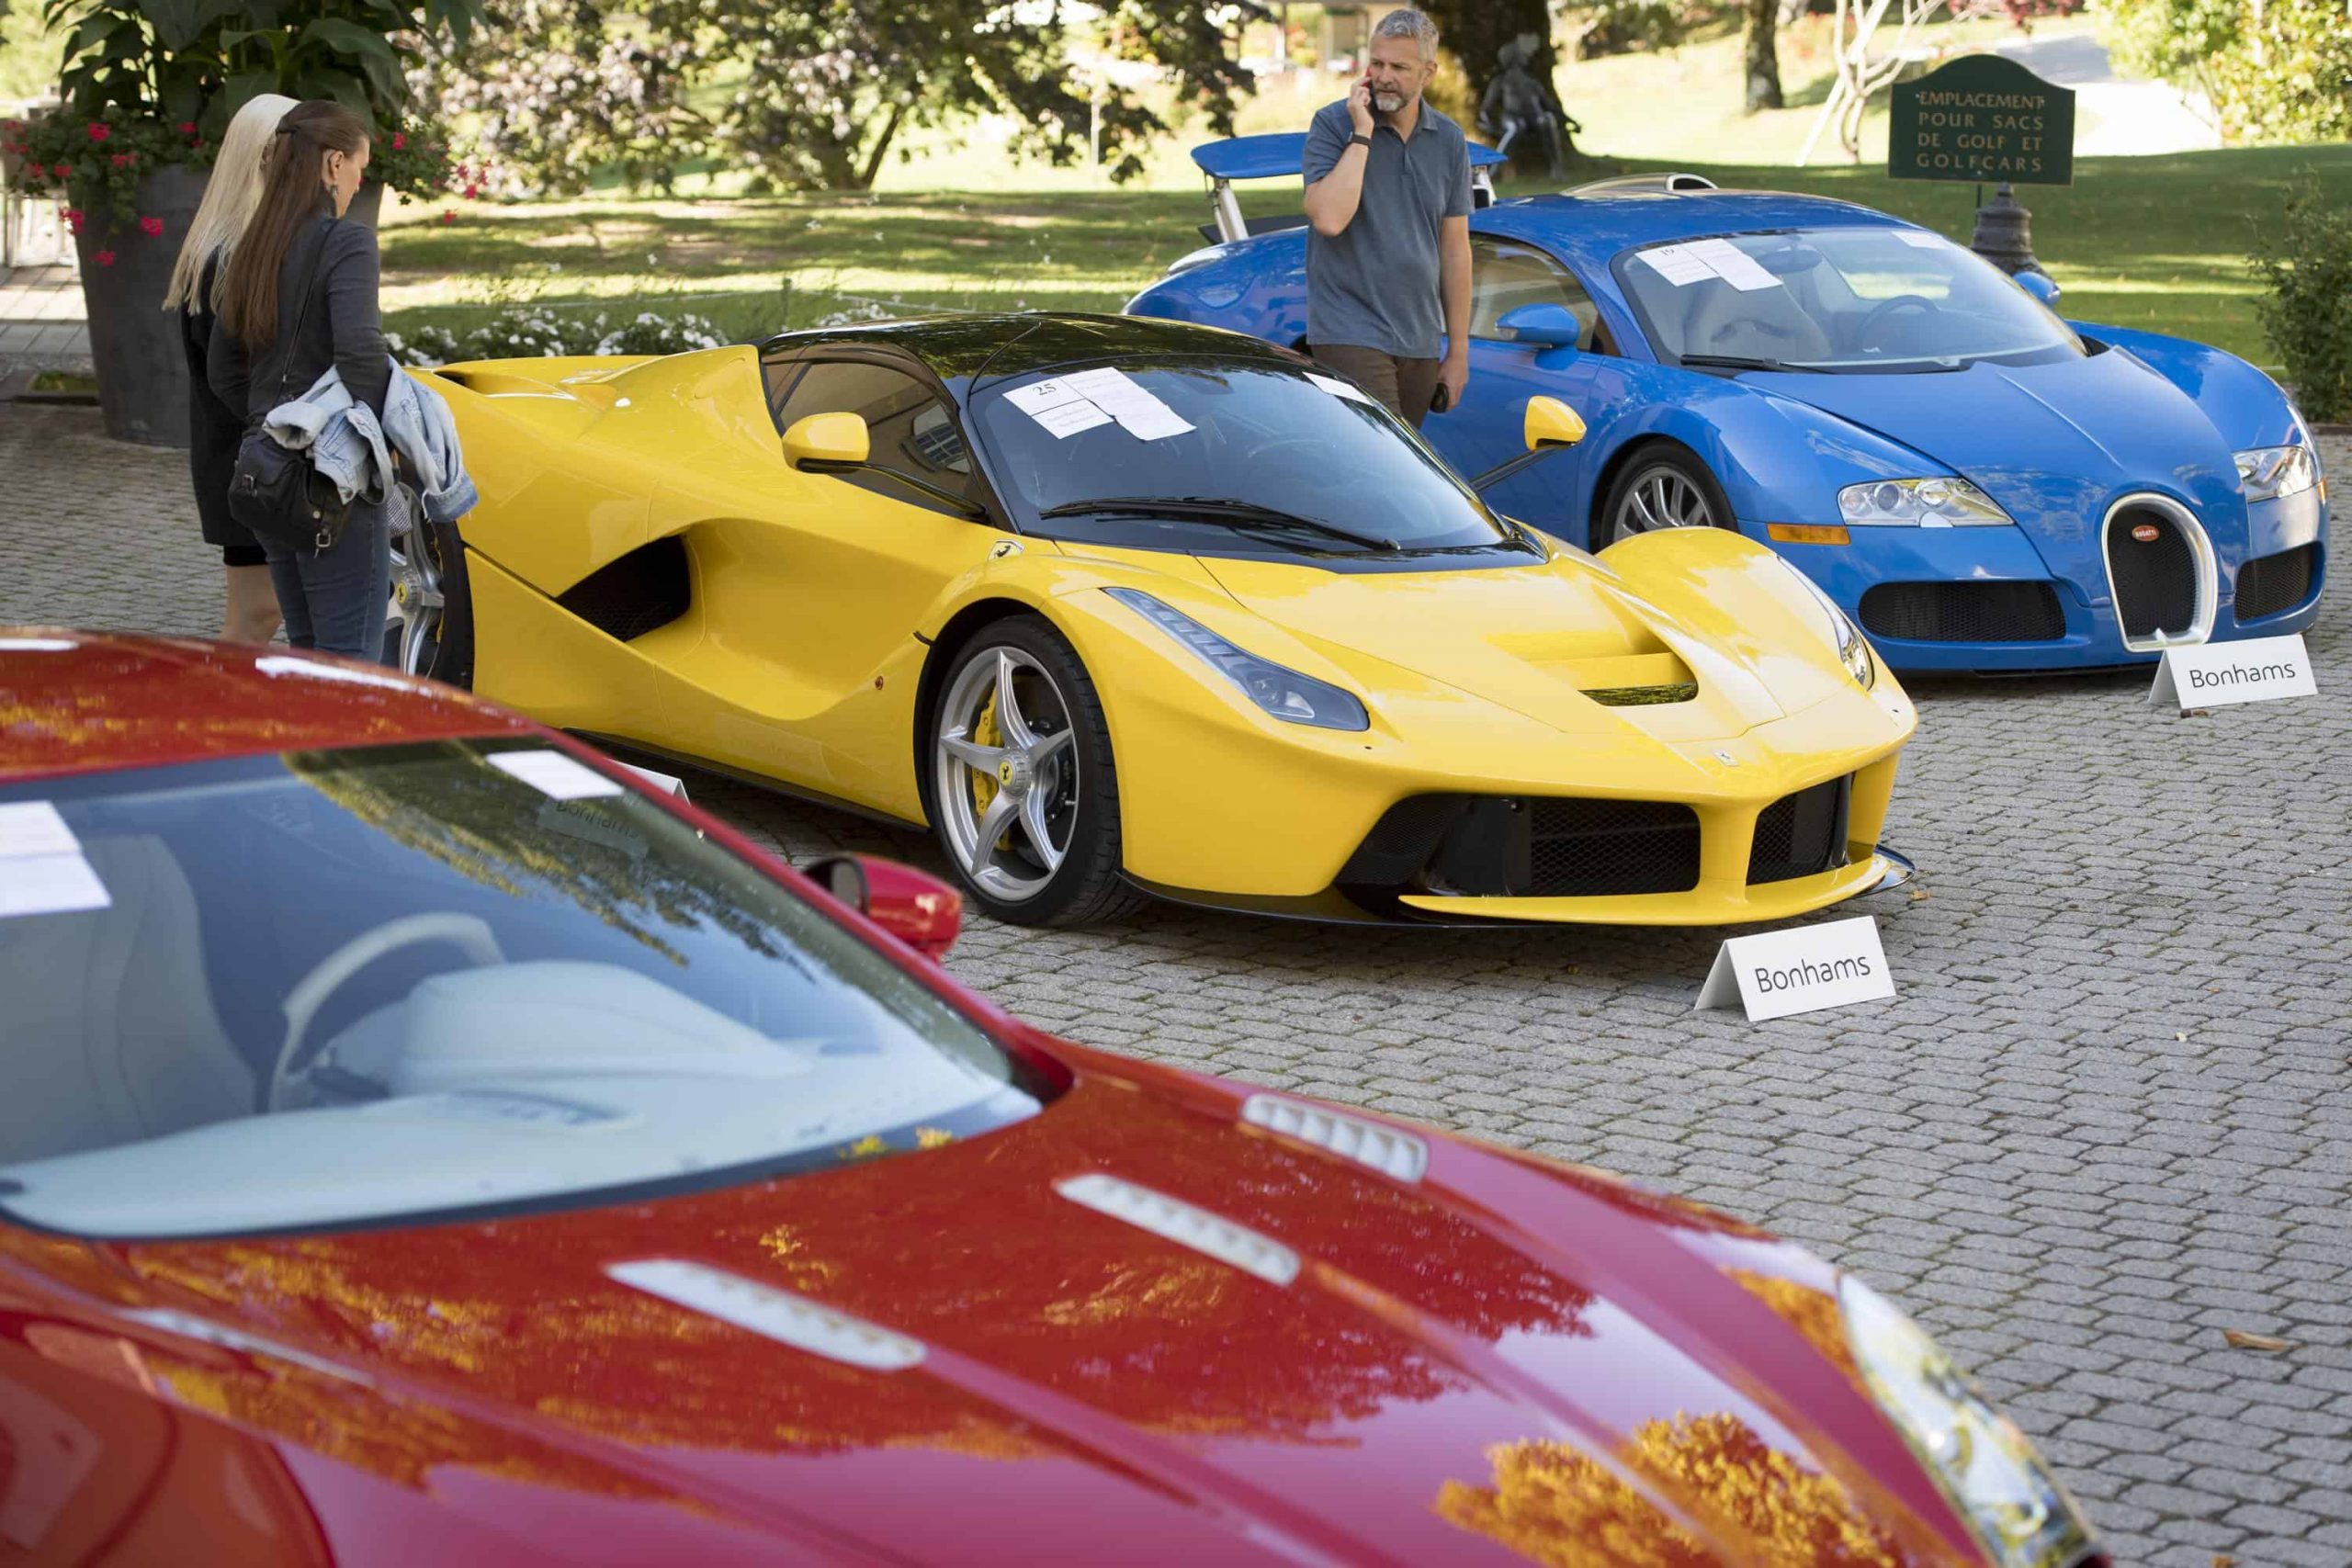 Supercars seized from African leader’s son auctioned for £22m